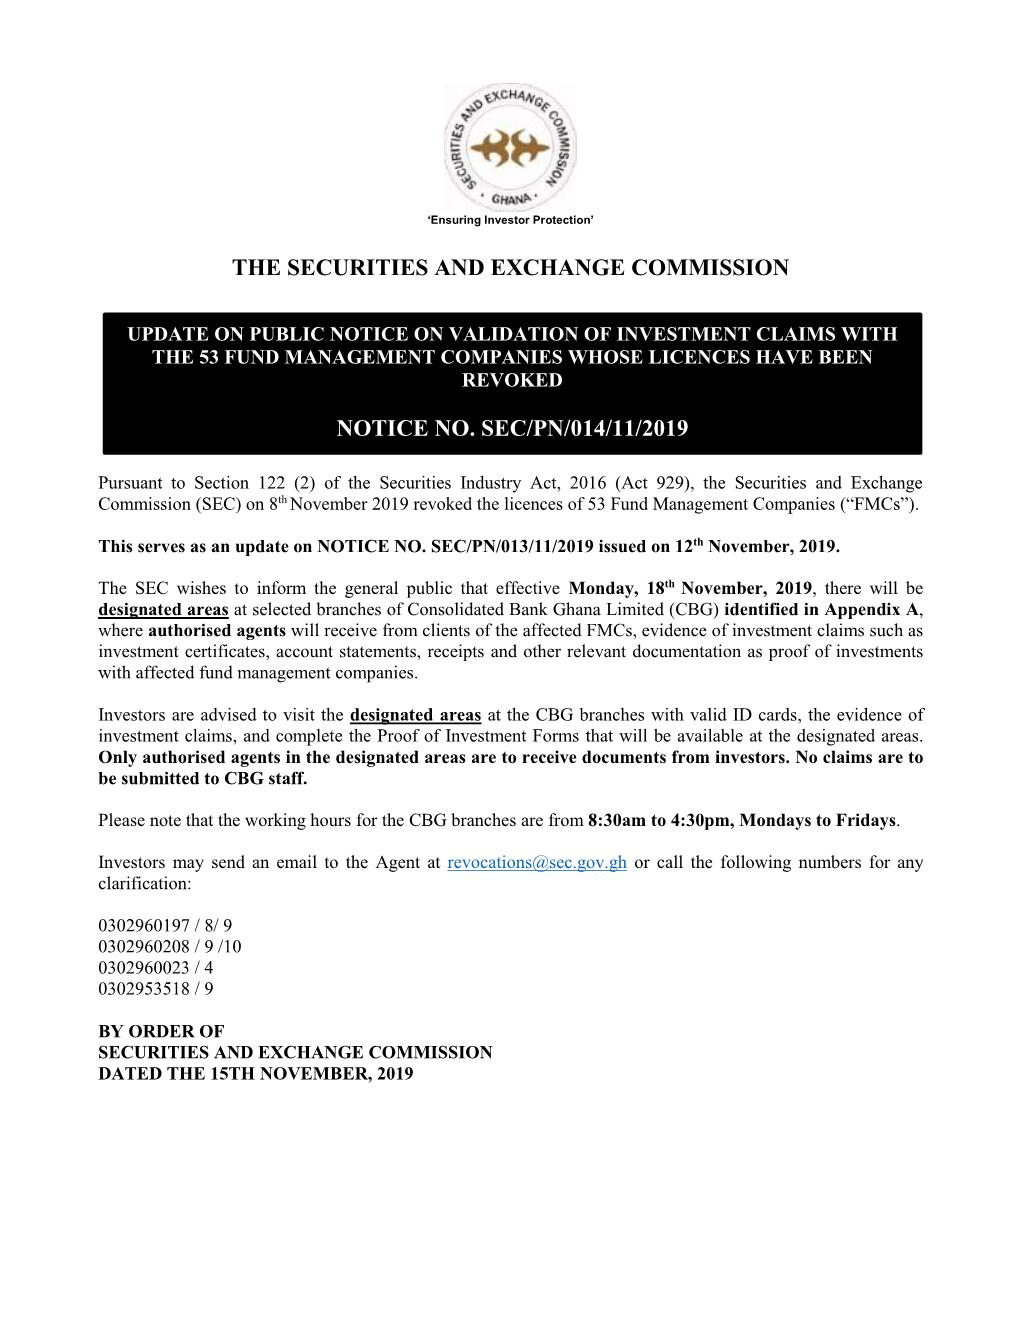 Public Notice on Validation of Investment Claims Against the 53 Fund Management Companies Whose Licences Have